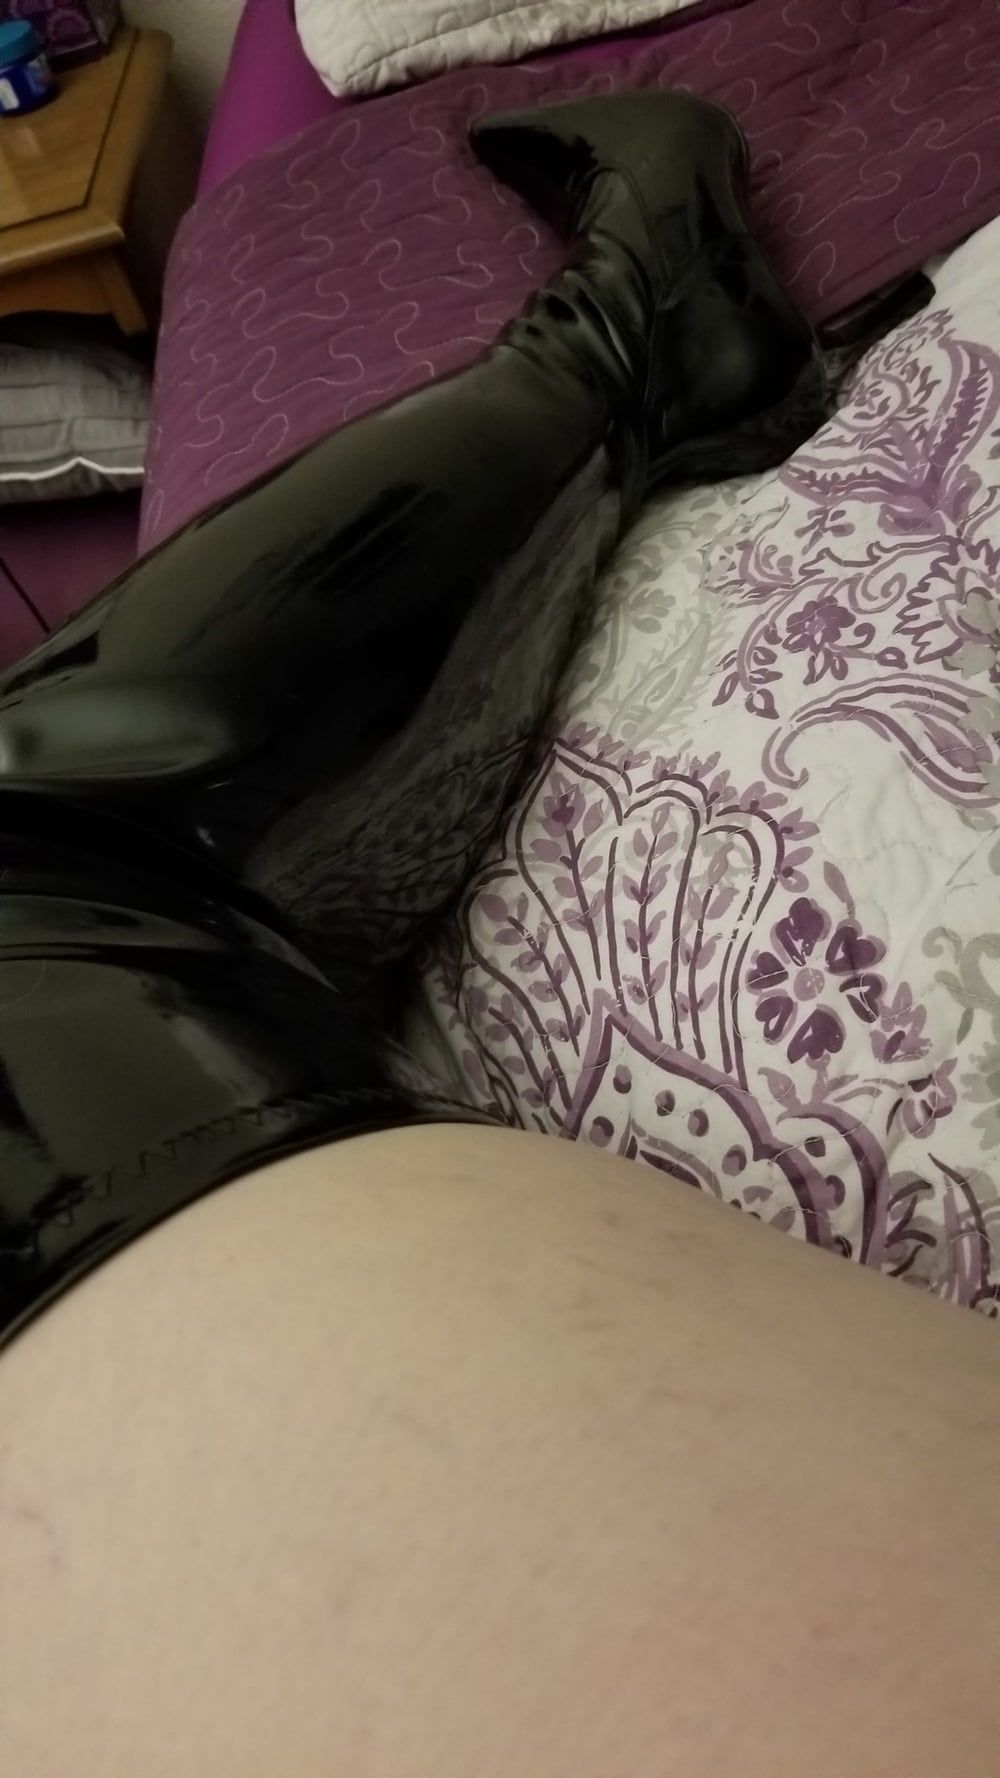 Hubby home early surprised to find wife in thighhigh boots #50